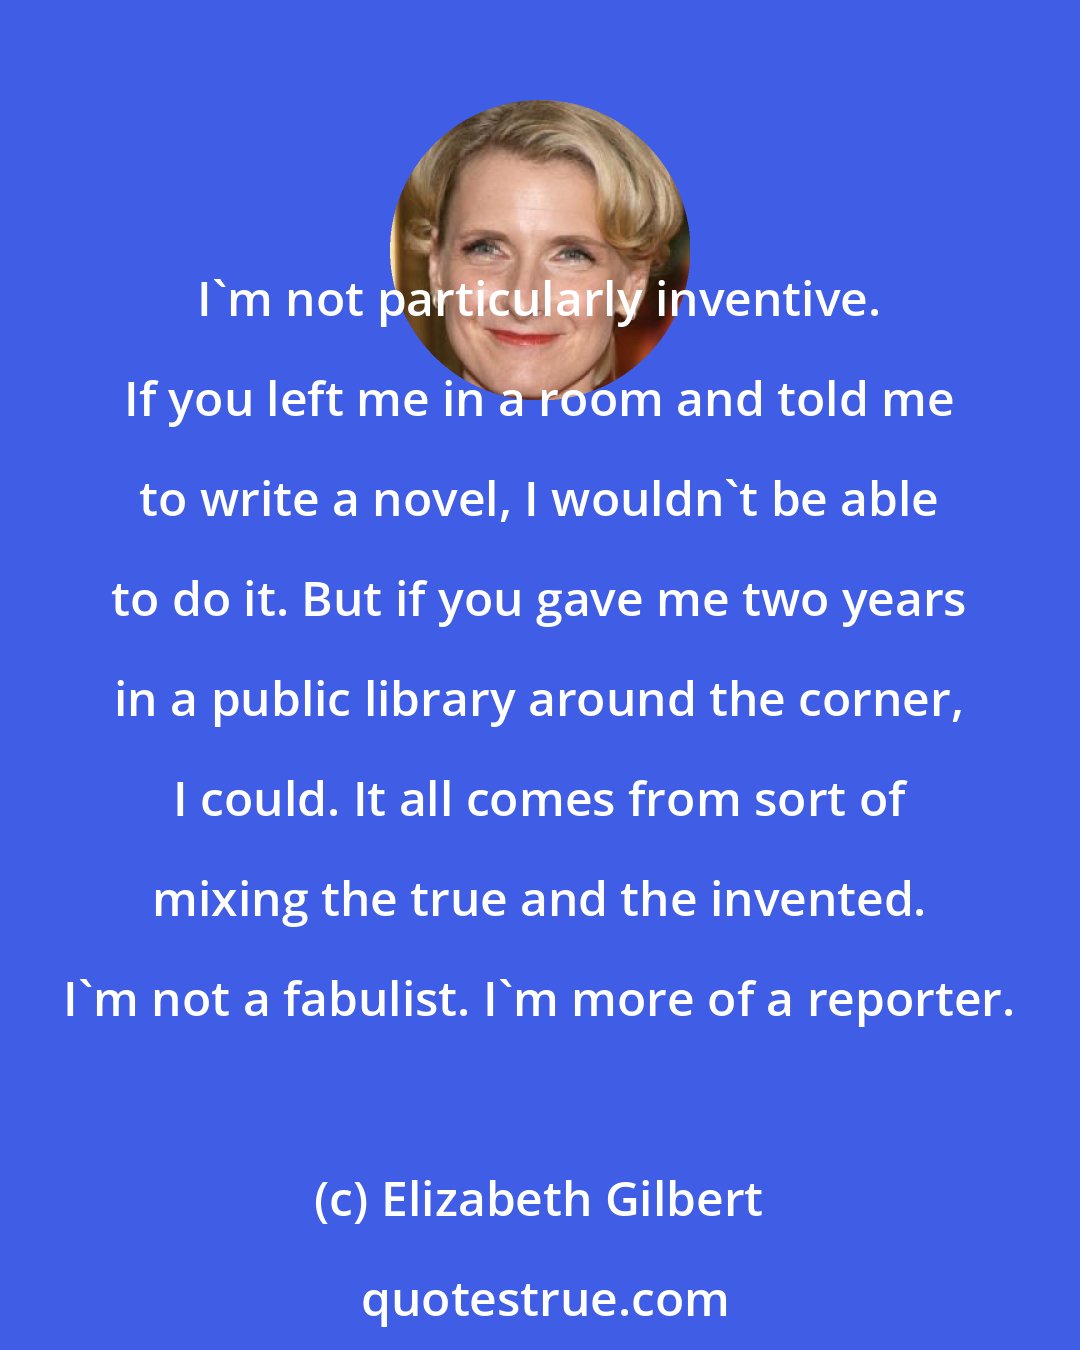 Elizabeth Gilbert: I'm not particularly inventive. If you left me in а room and told me to write a novel, I wouldn't be able to do it. But if you gave me two years in a public library around the corner, I could. It all comes from sort of mixing the true and the invented. I'm not a fabulist. I'm more of a reporter.